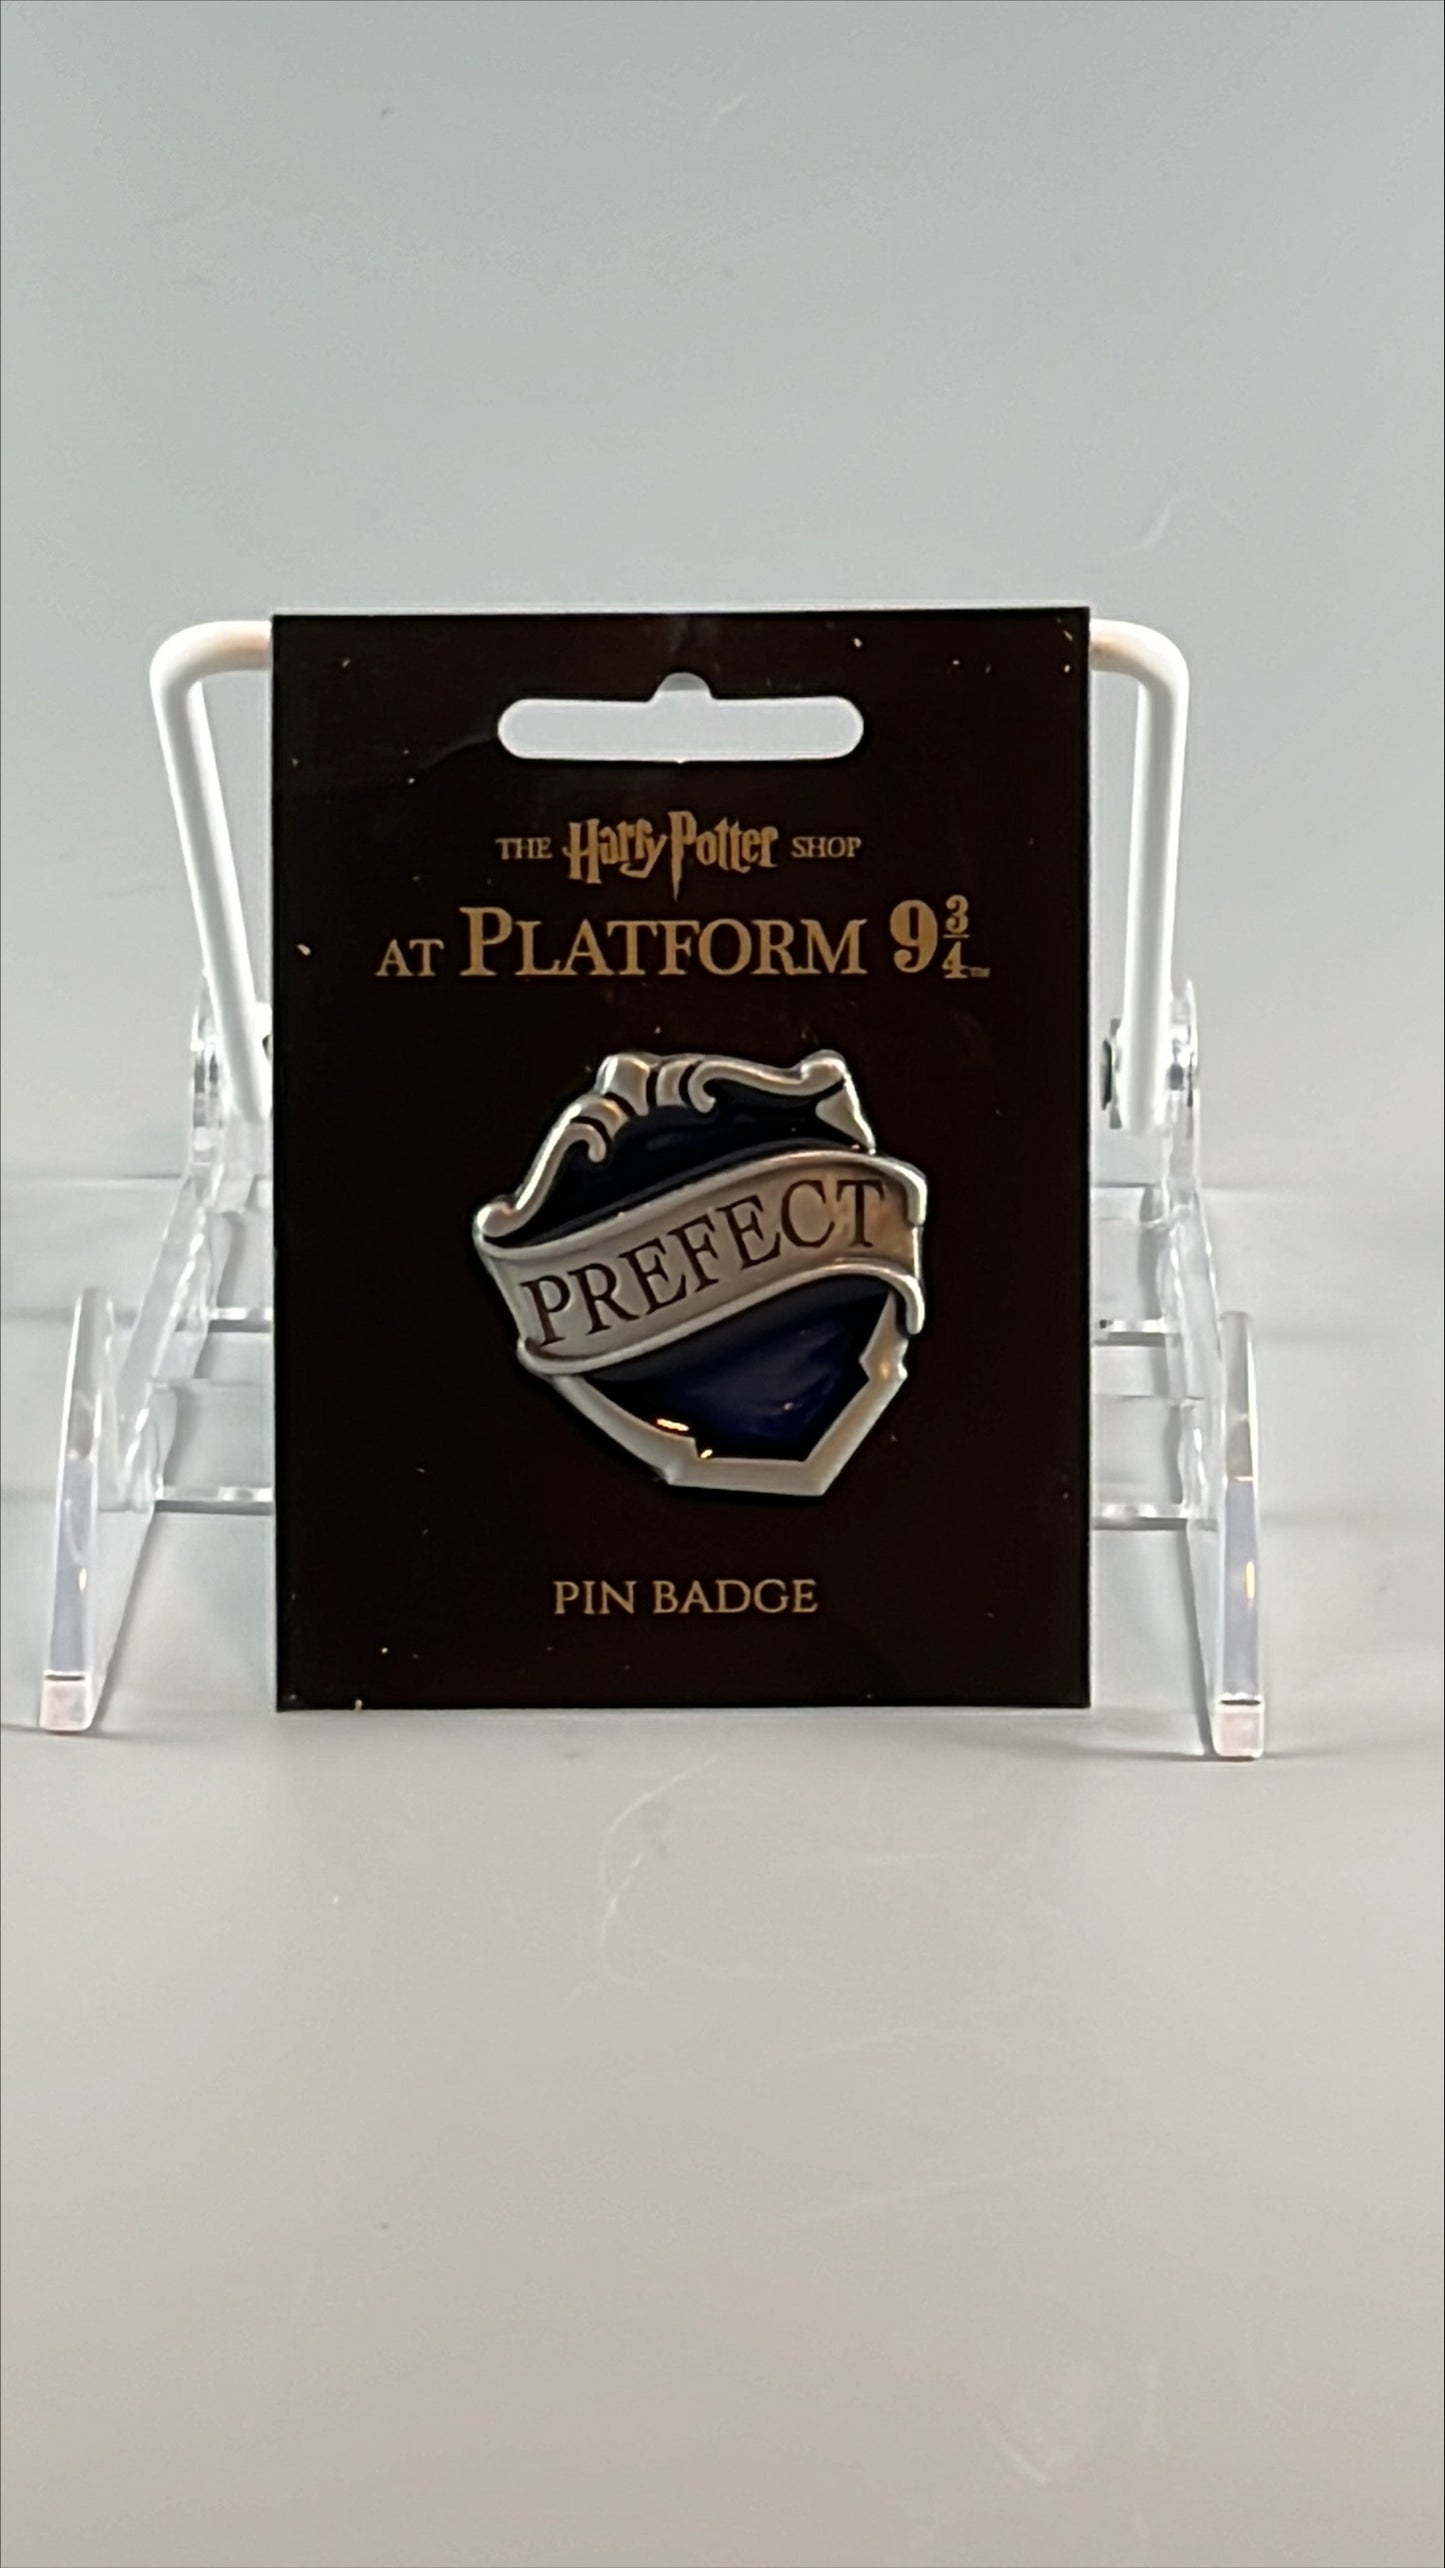 Prefect Pin Badge from The Harry Potter Shop at Platform 9 3/4